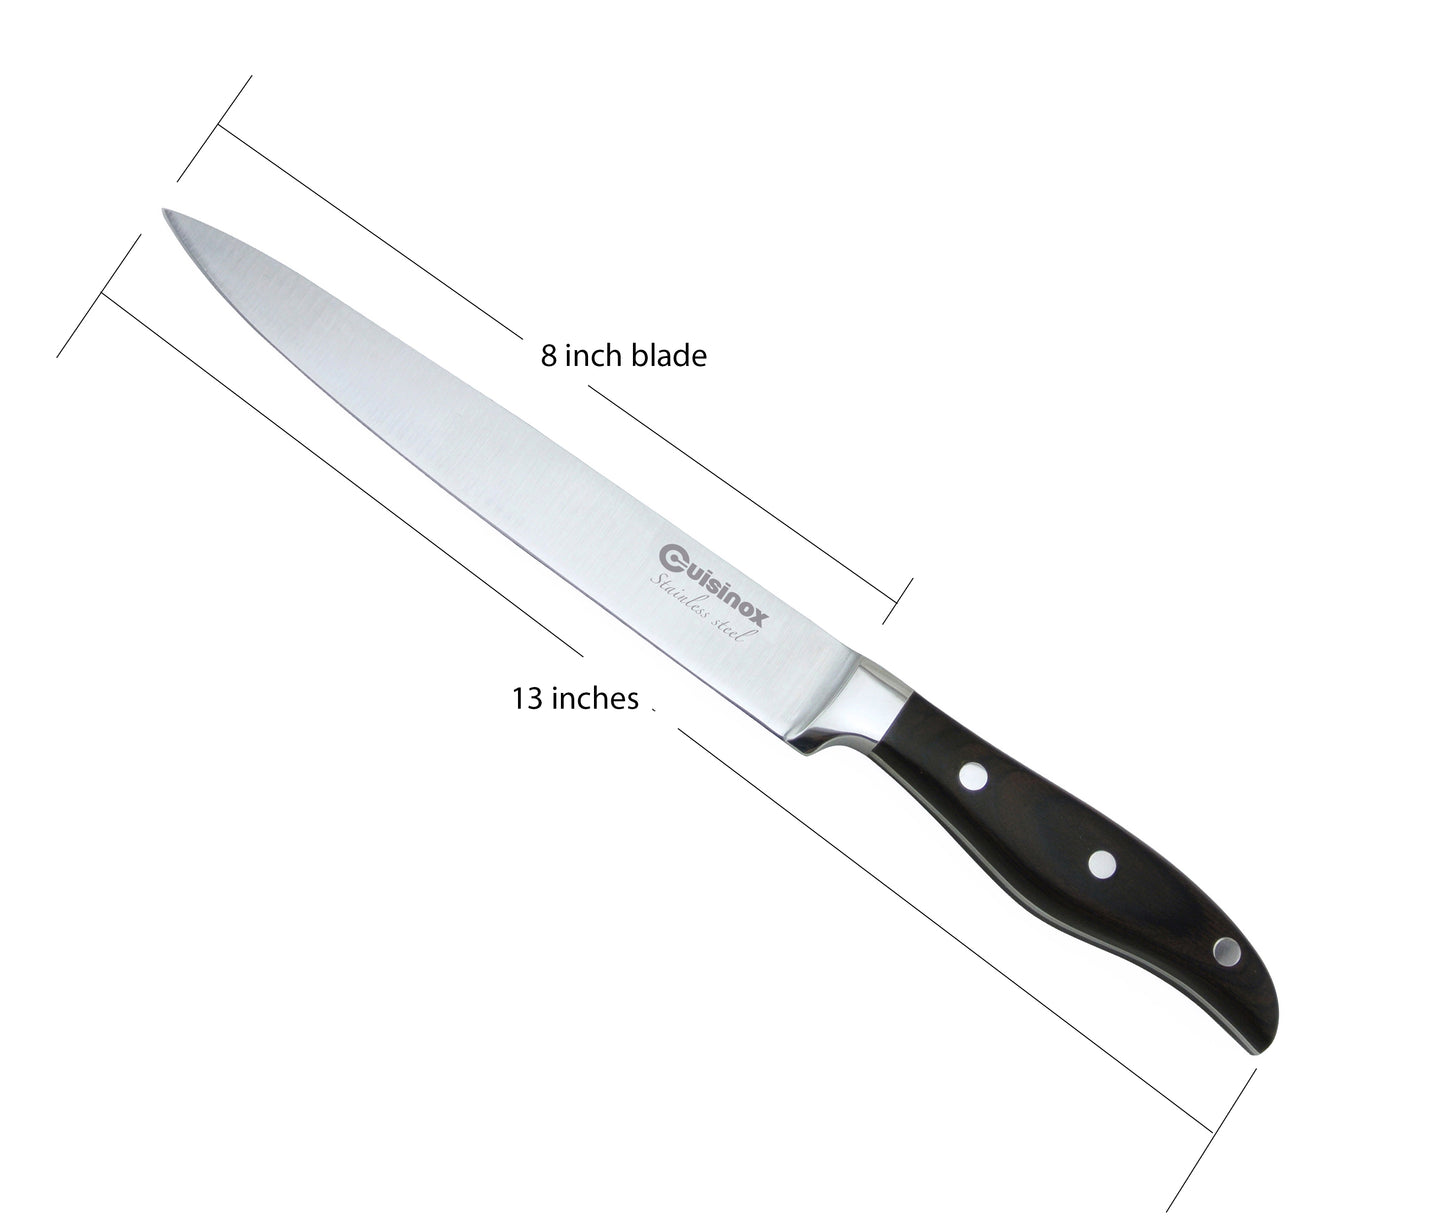 Cuisinox Deluxe Carving Knife, 13" long